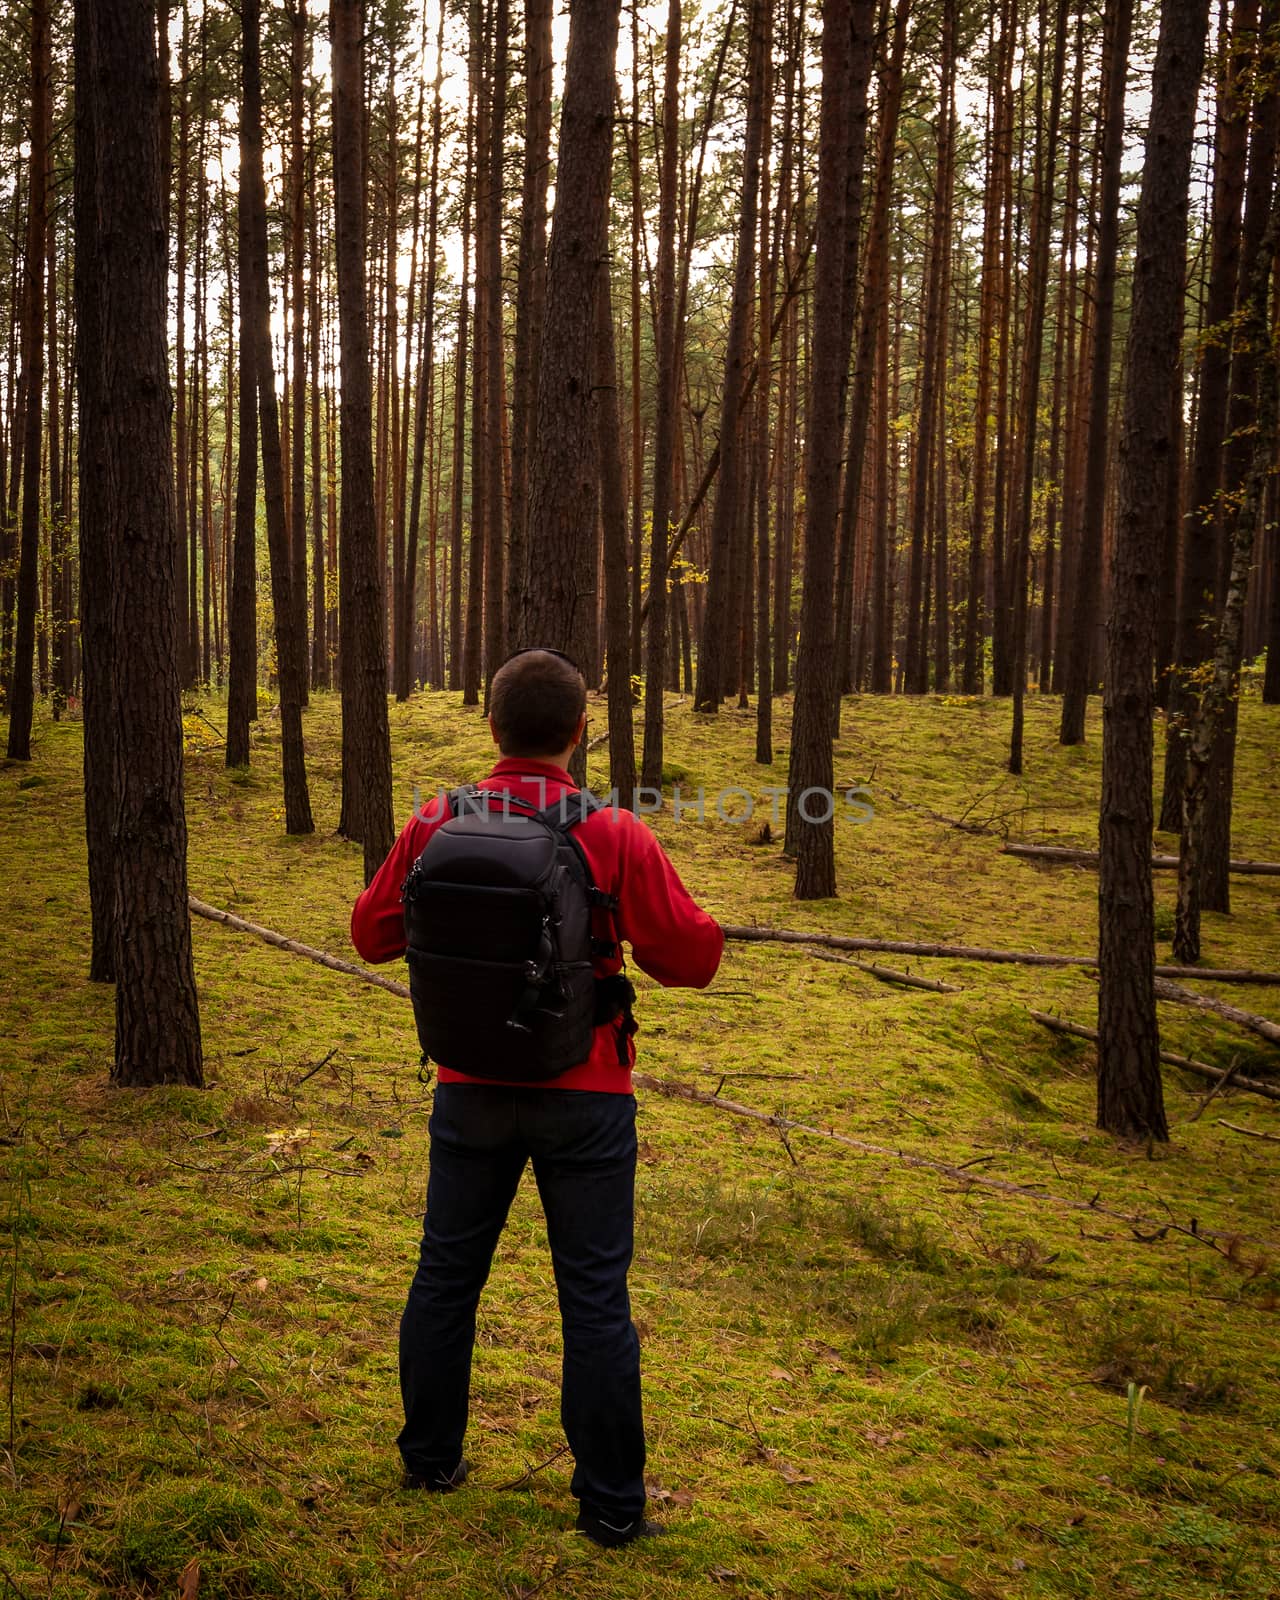 A man tourist in a bright red jacket with a backpack behind his back, standing in an autumn pine forest.